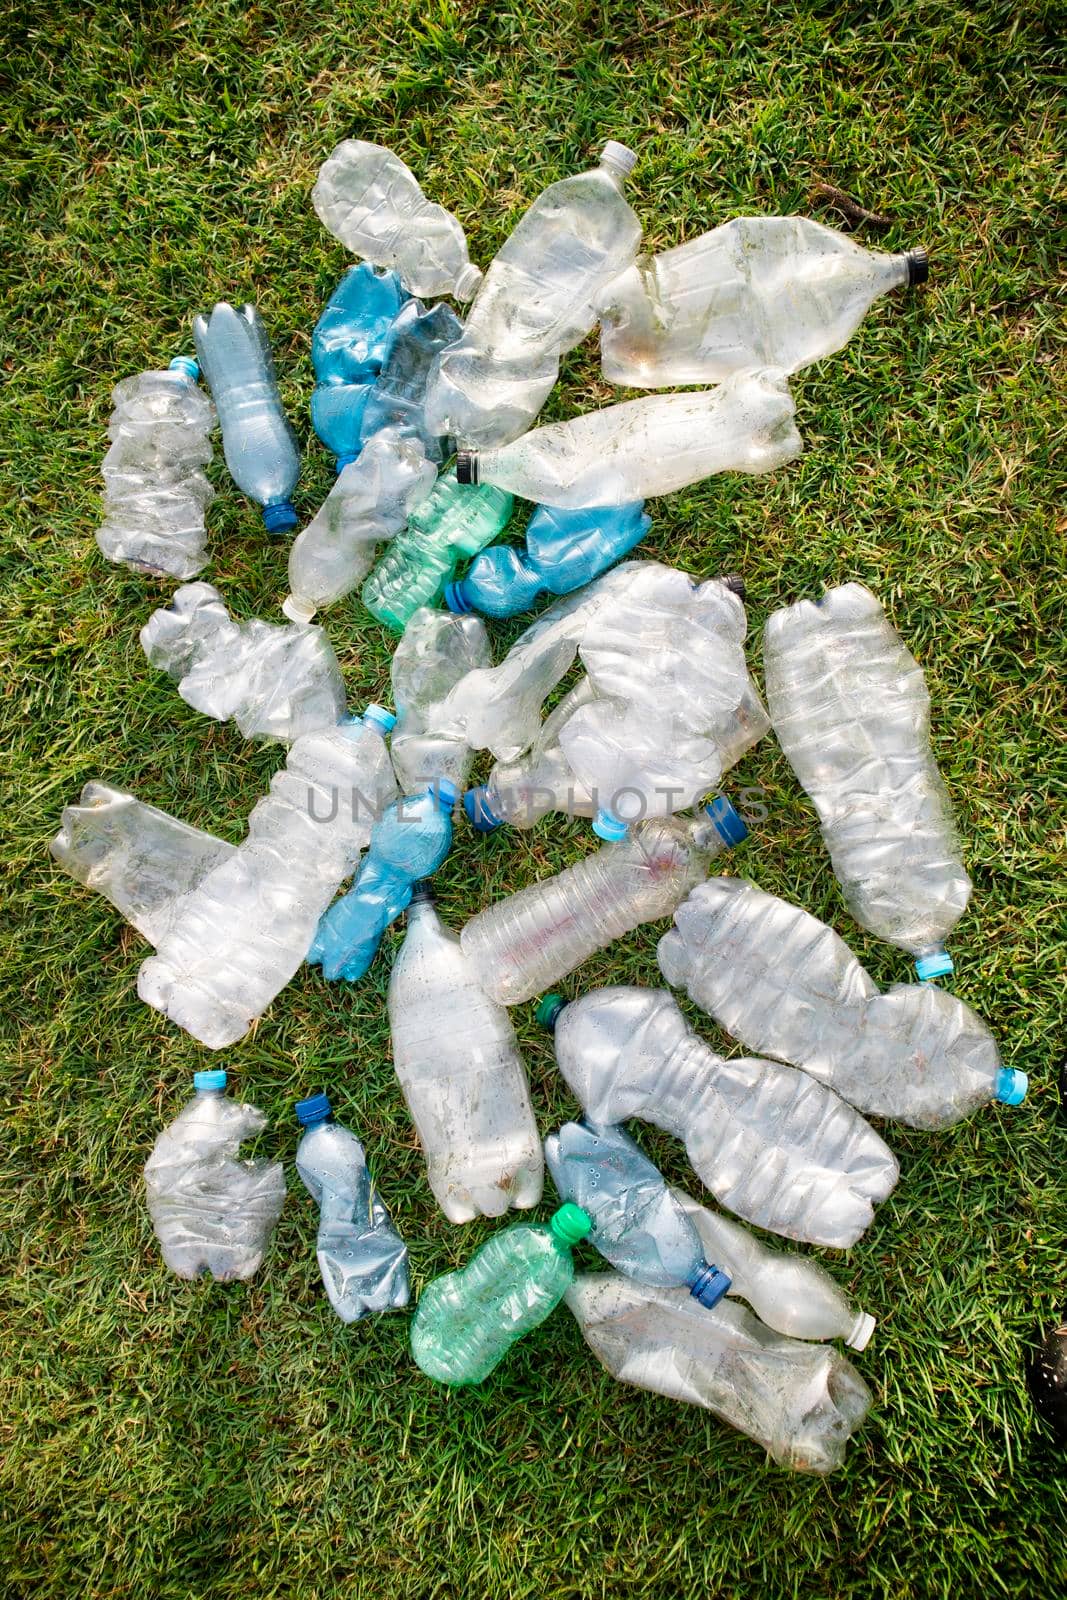 Sign of incivility used plastic bottles abandoned in a meadow 